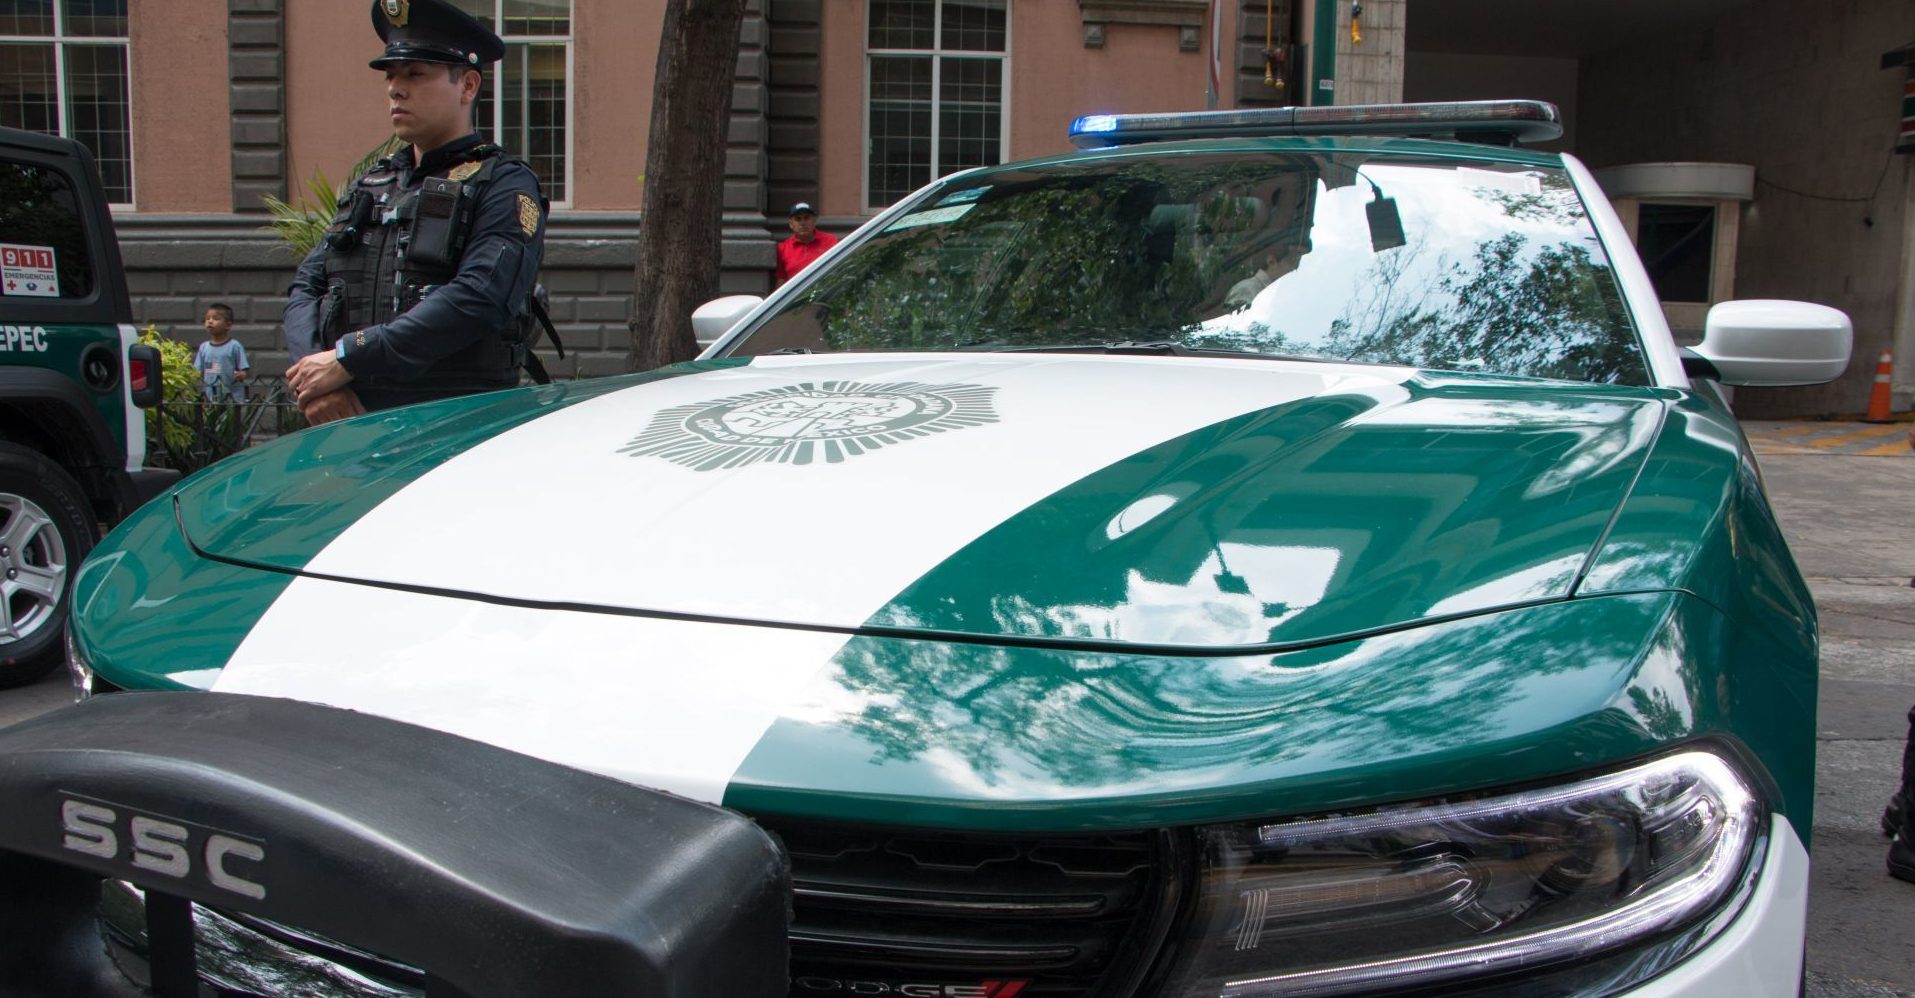 Alleged policeman, charged with sexual abuse against woman in Chapultepec